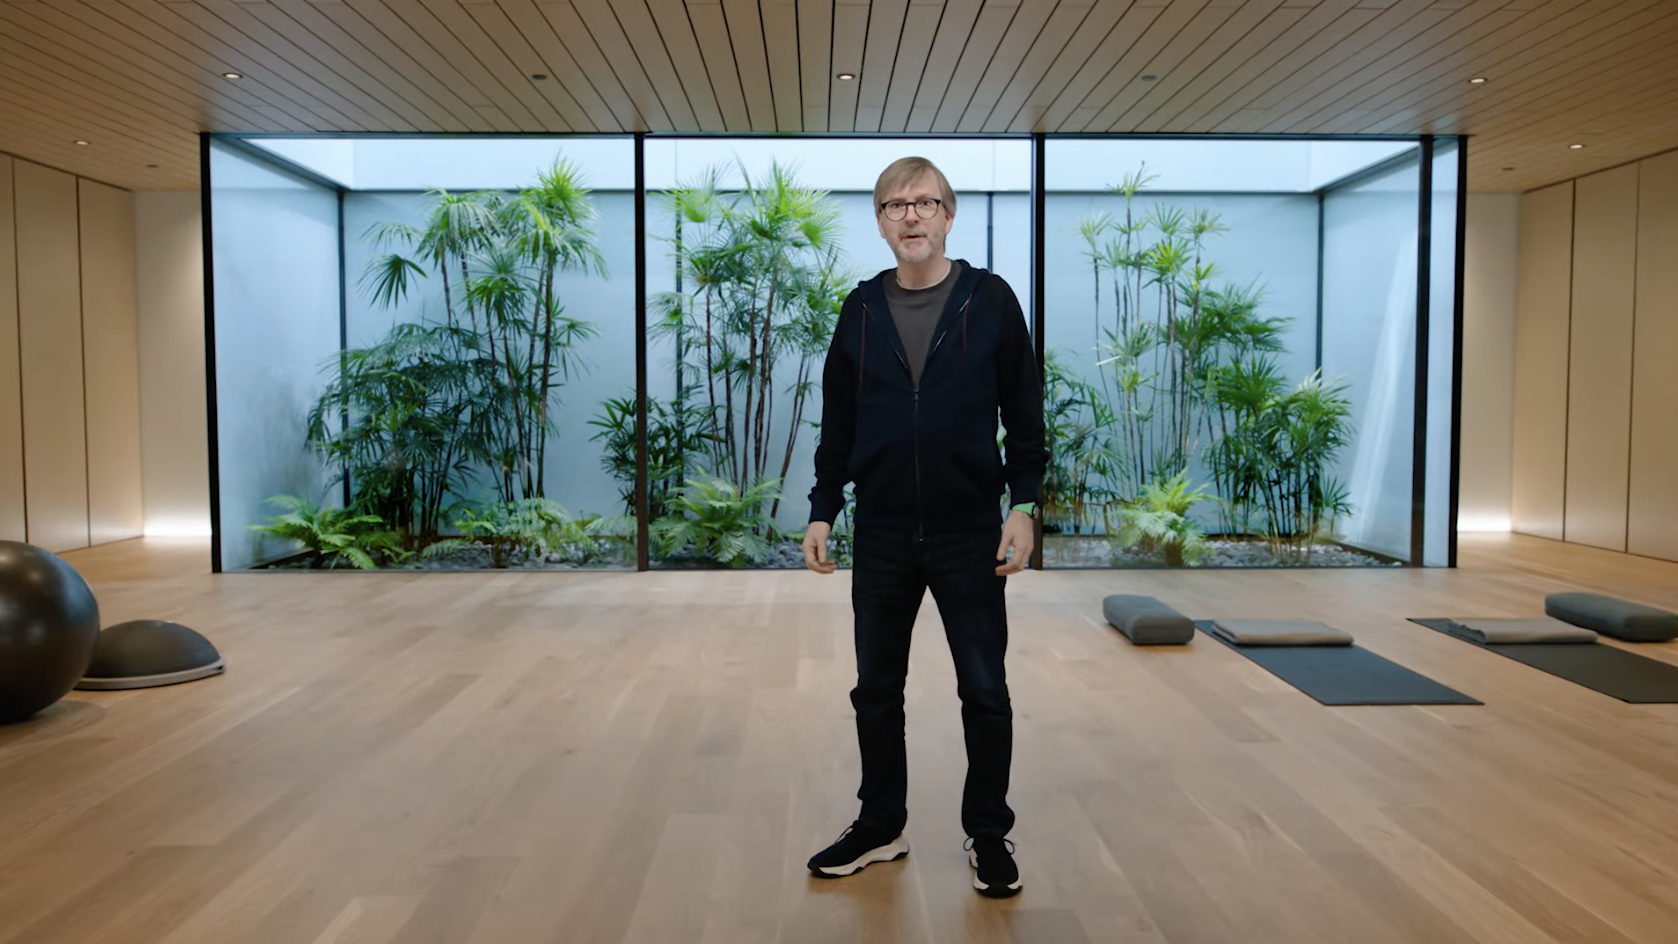 Kevin Lynch stands in a yoga studio in front of an atrium with trees.